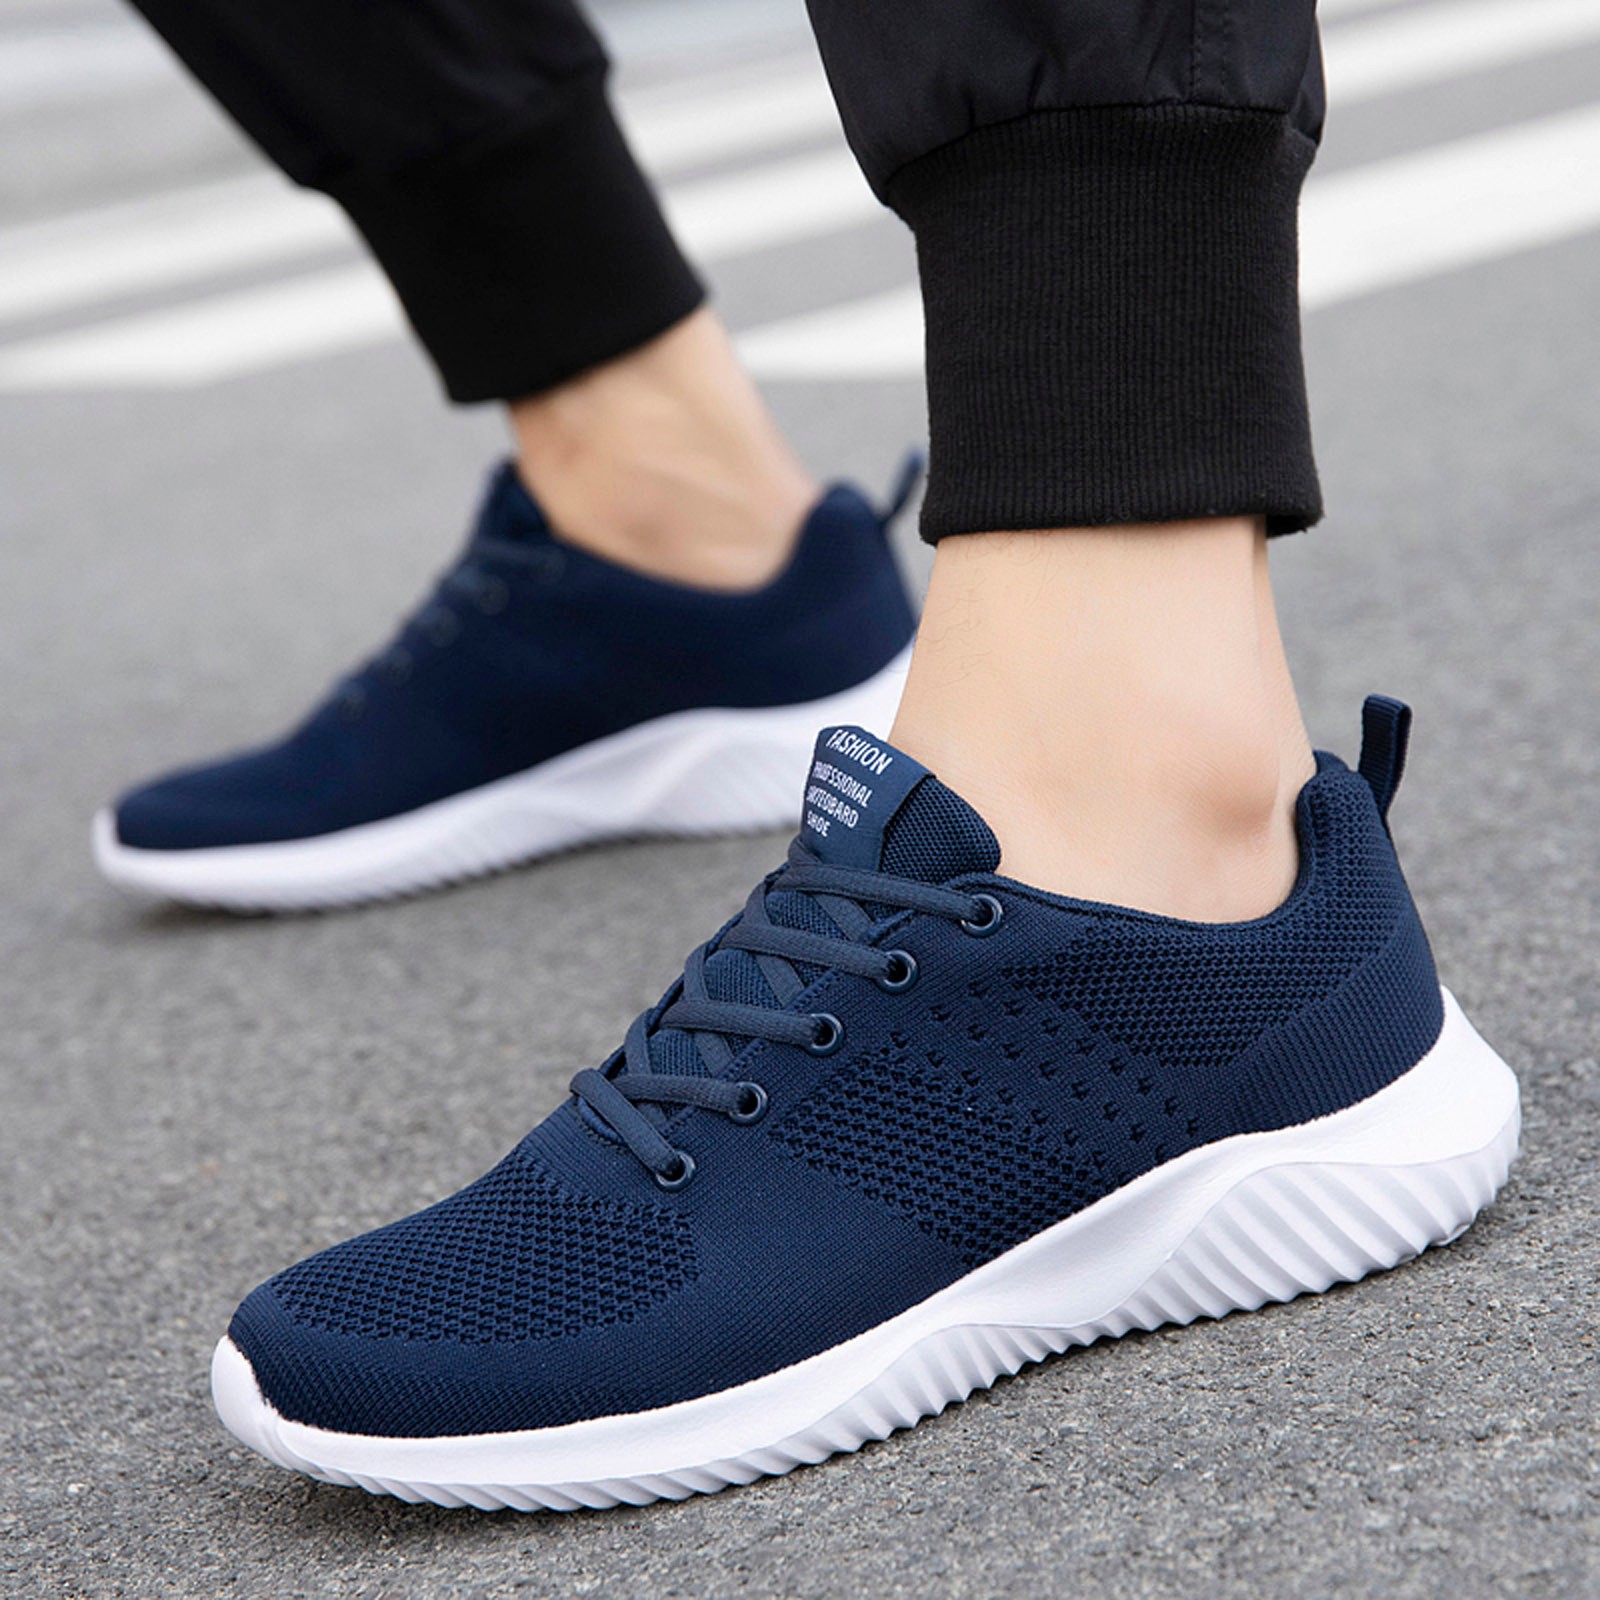 CBGELRT Shoes for Men Classic Men's Sneakers Tennis Shoes for Men Fashion Men Mesh Casual Sport Shoes Lace-up Breathable Soft Bottom Sneakers Male Blue 45 - image 4 of 9